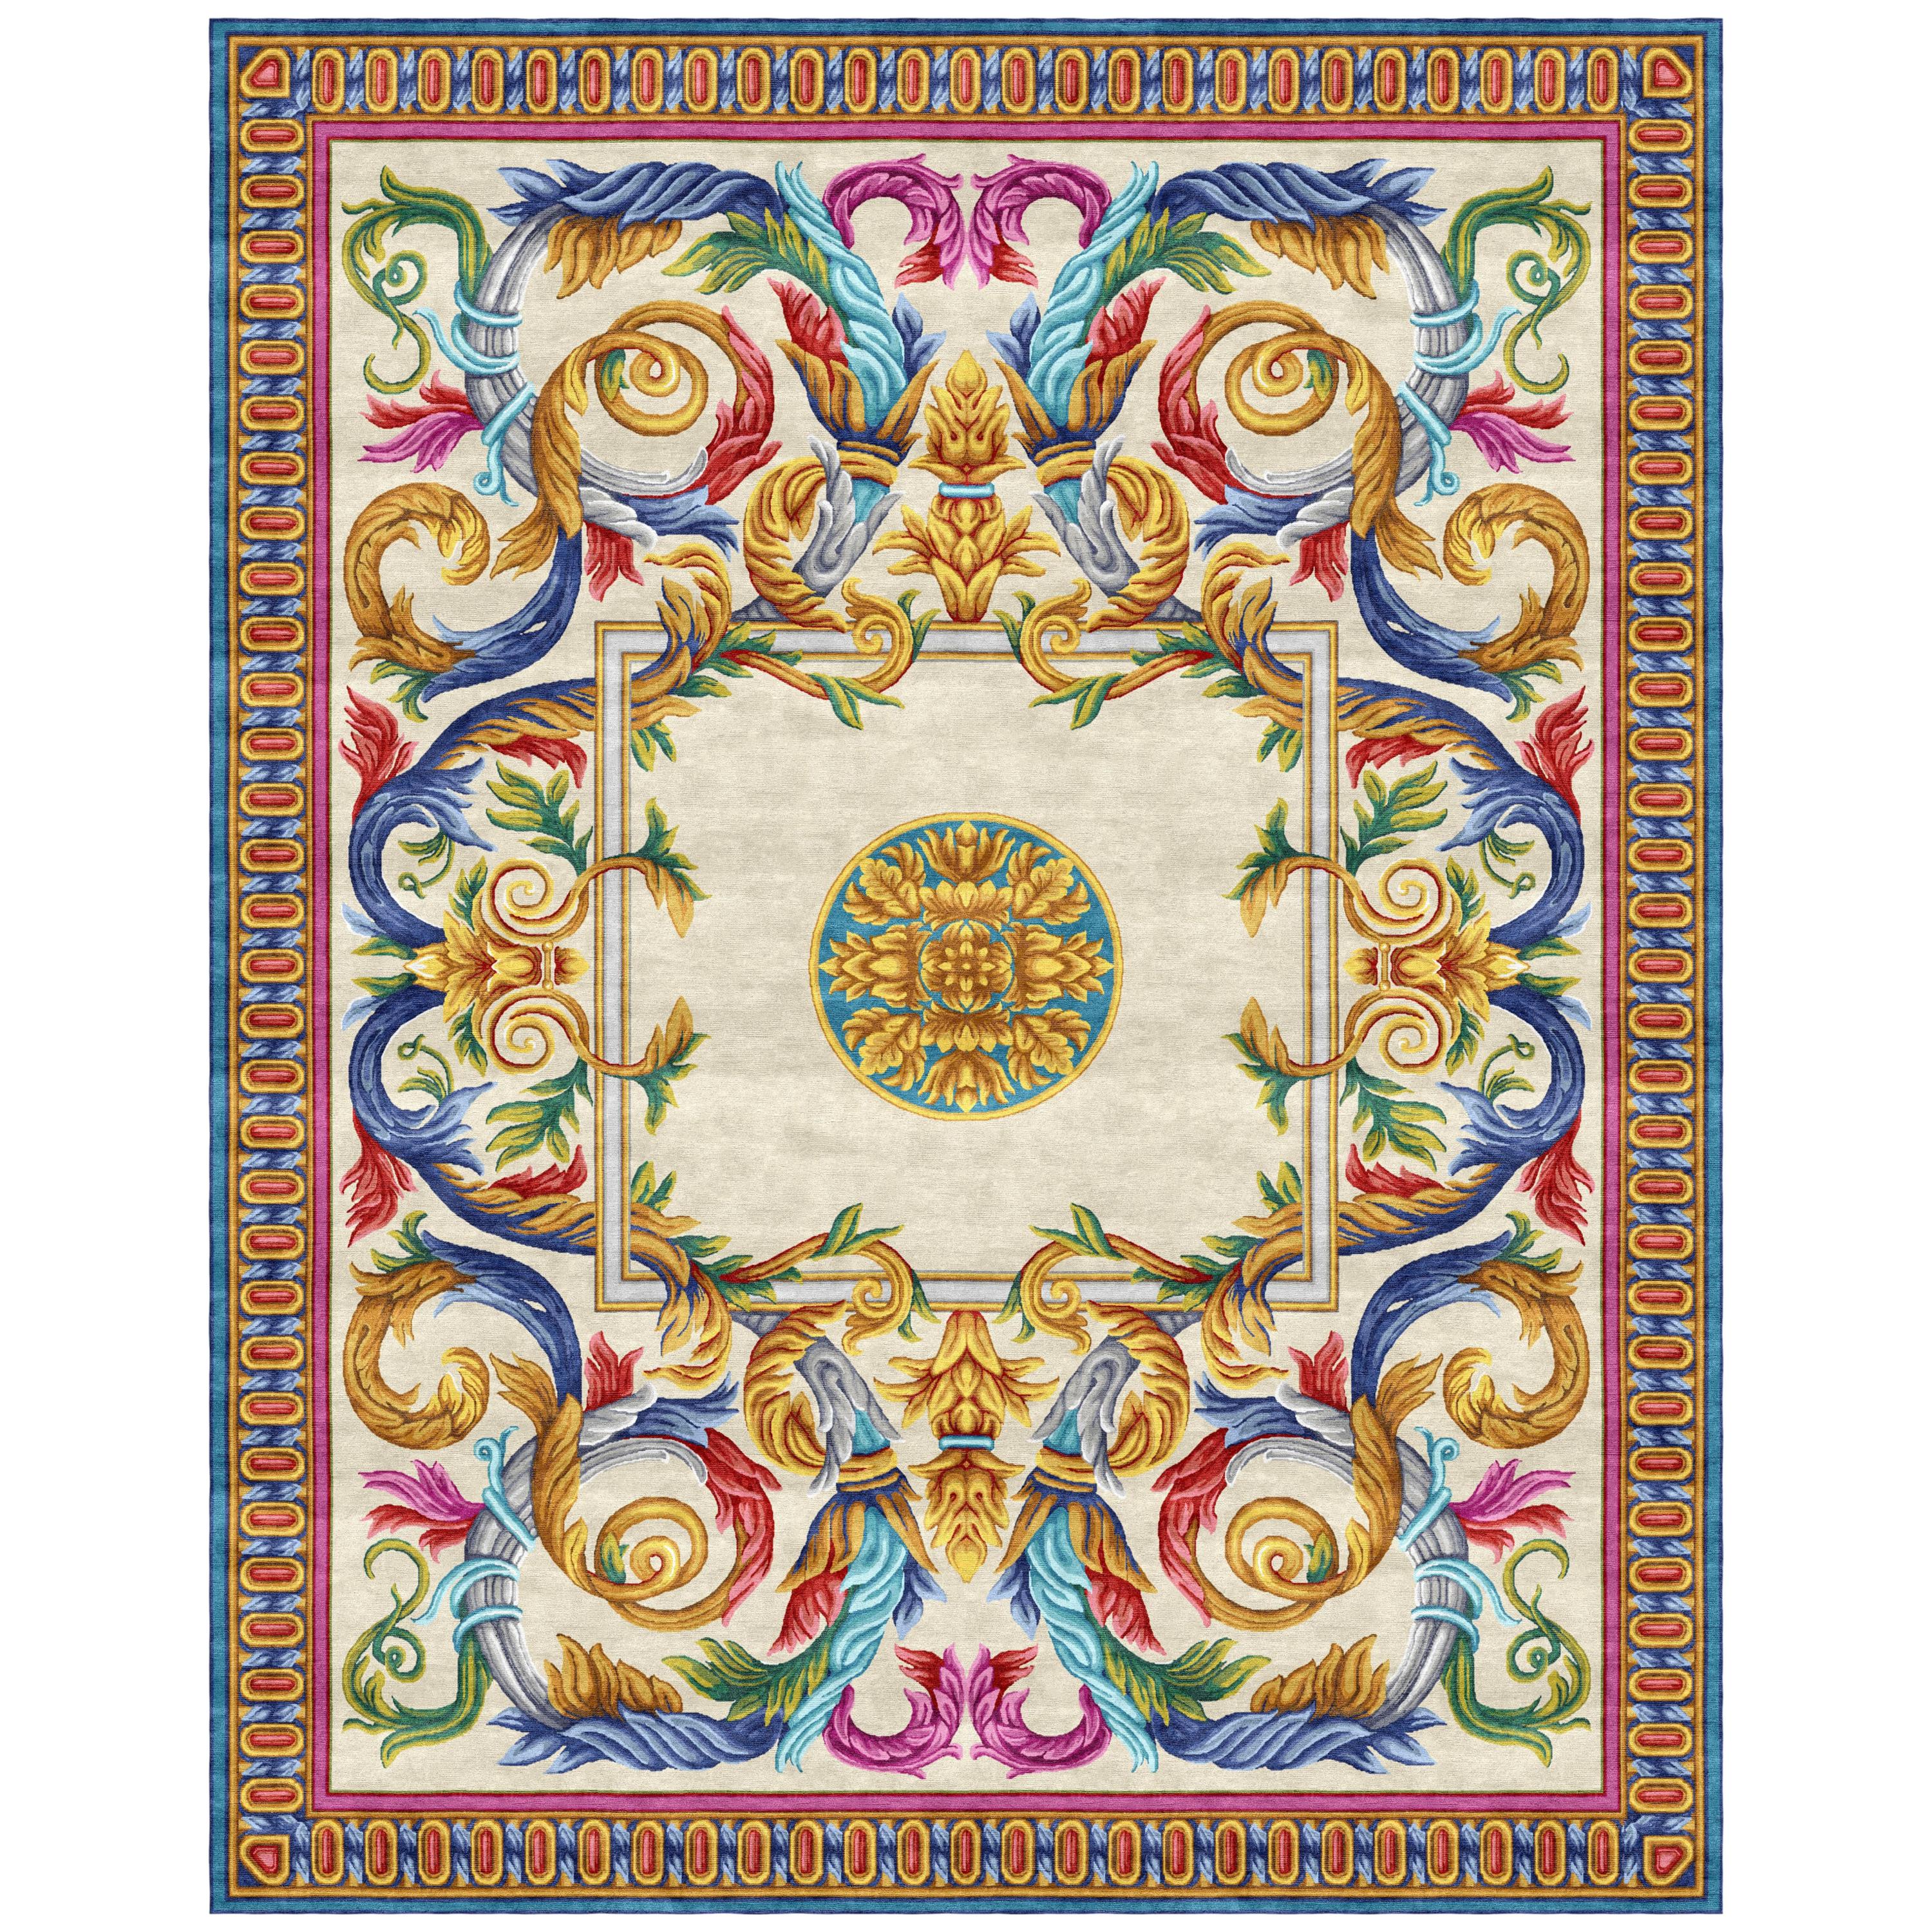 Aubusson Heraldy Floral Grotesque - Multicolor Luxury Hand Knotted Wool Silk Rug